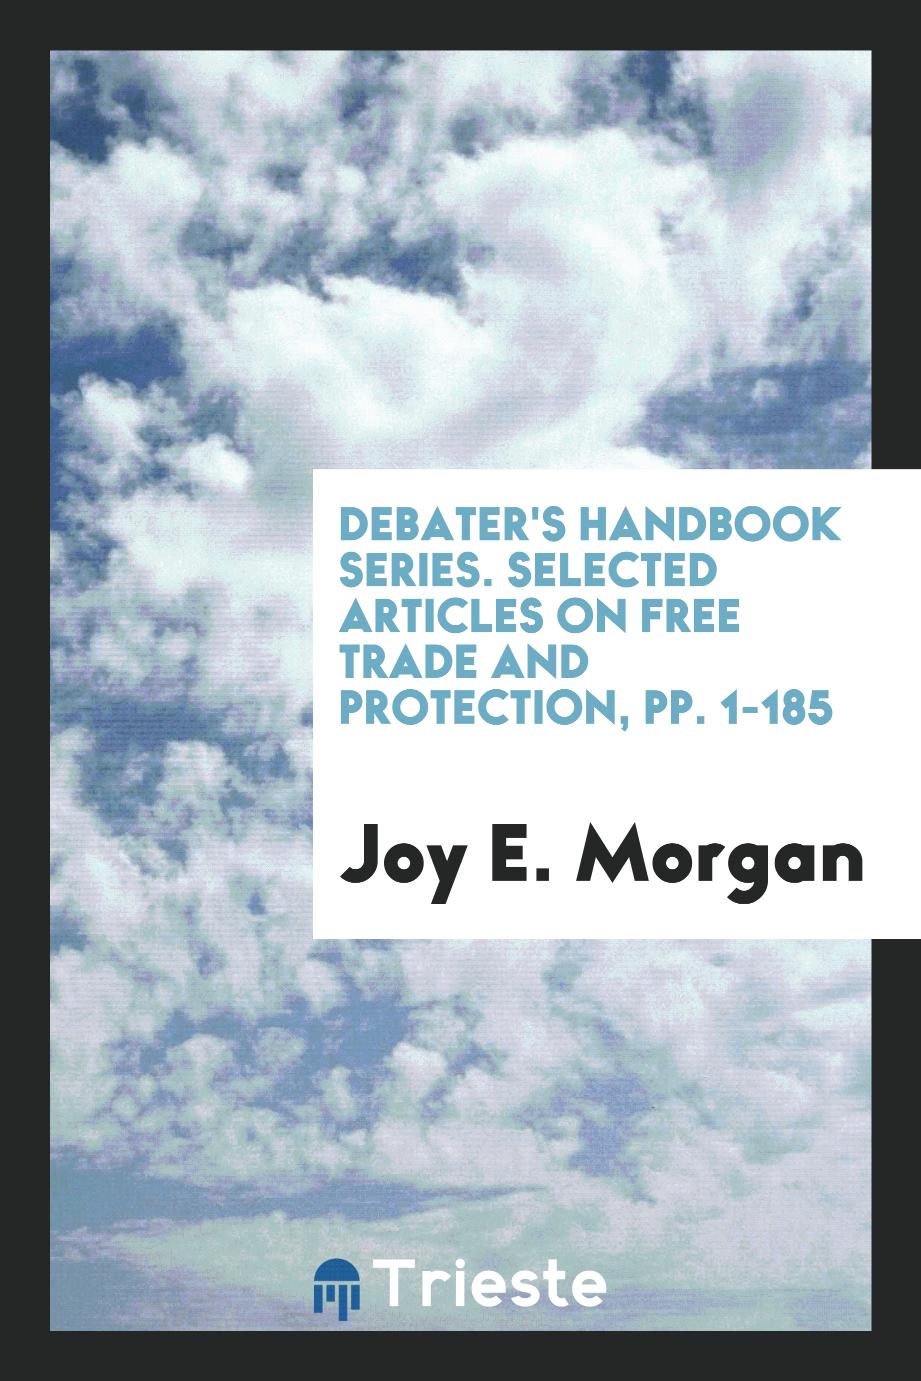 Debater's Handbook Series. Selected Articles on Free Trade and Protection, pp. 1-185